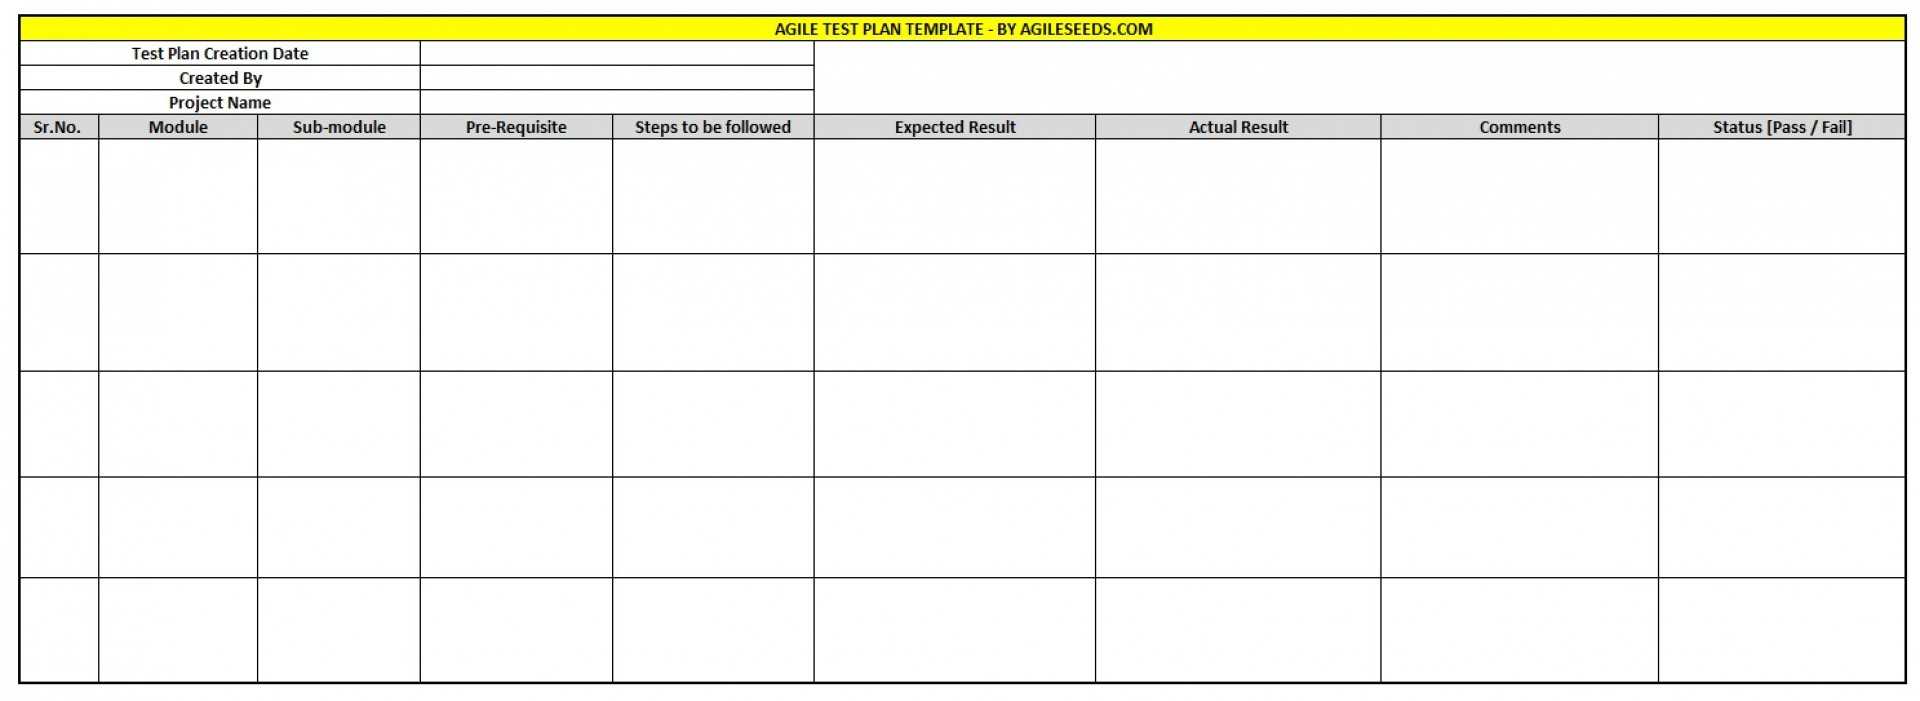 009 Ic Agile User Story Template 0 Test Plan Impressive Within User Story Template Word